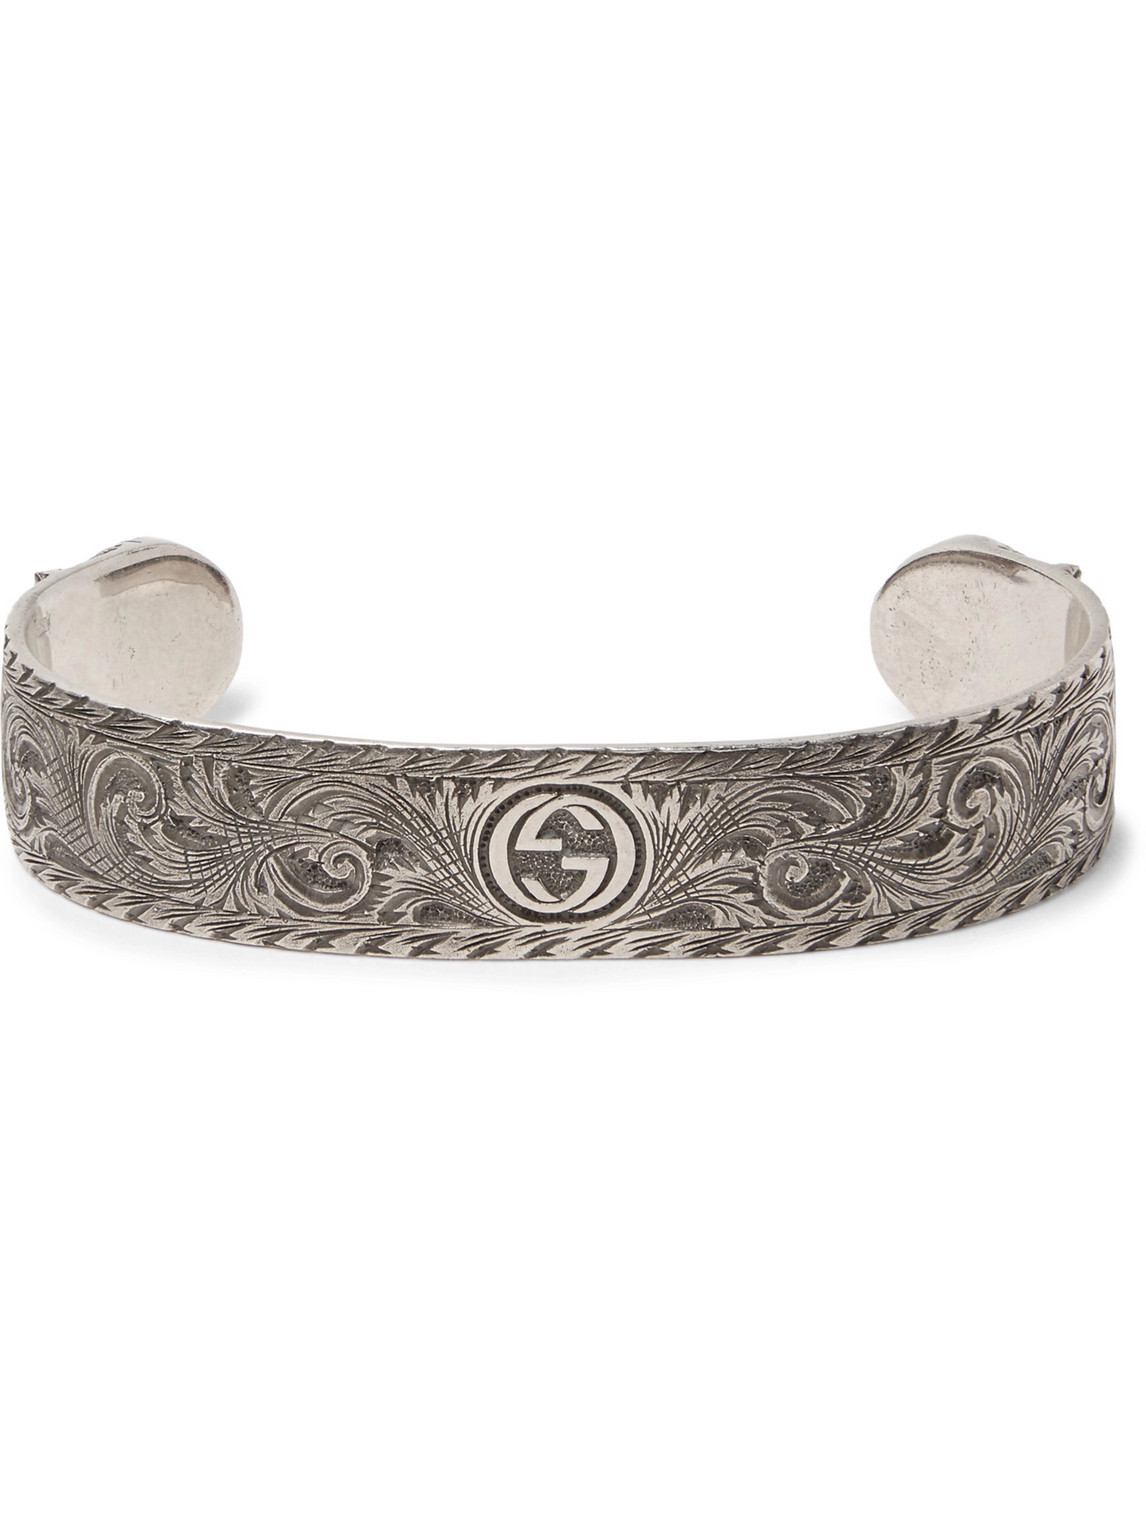 Engraved Sterling Silver Cuff